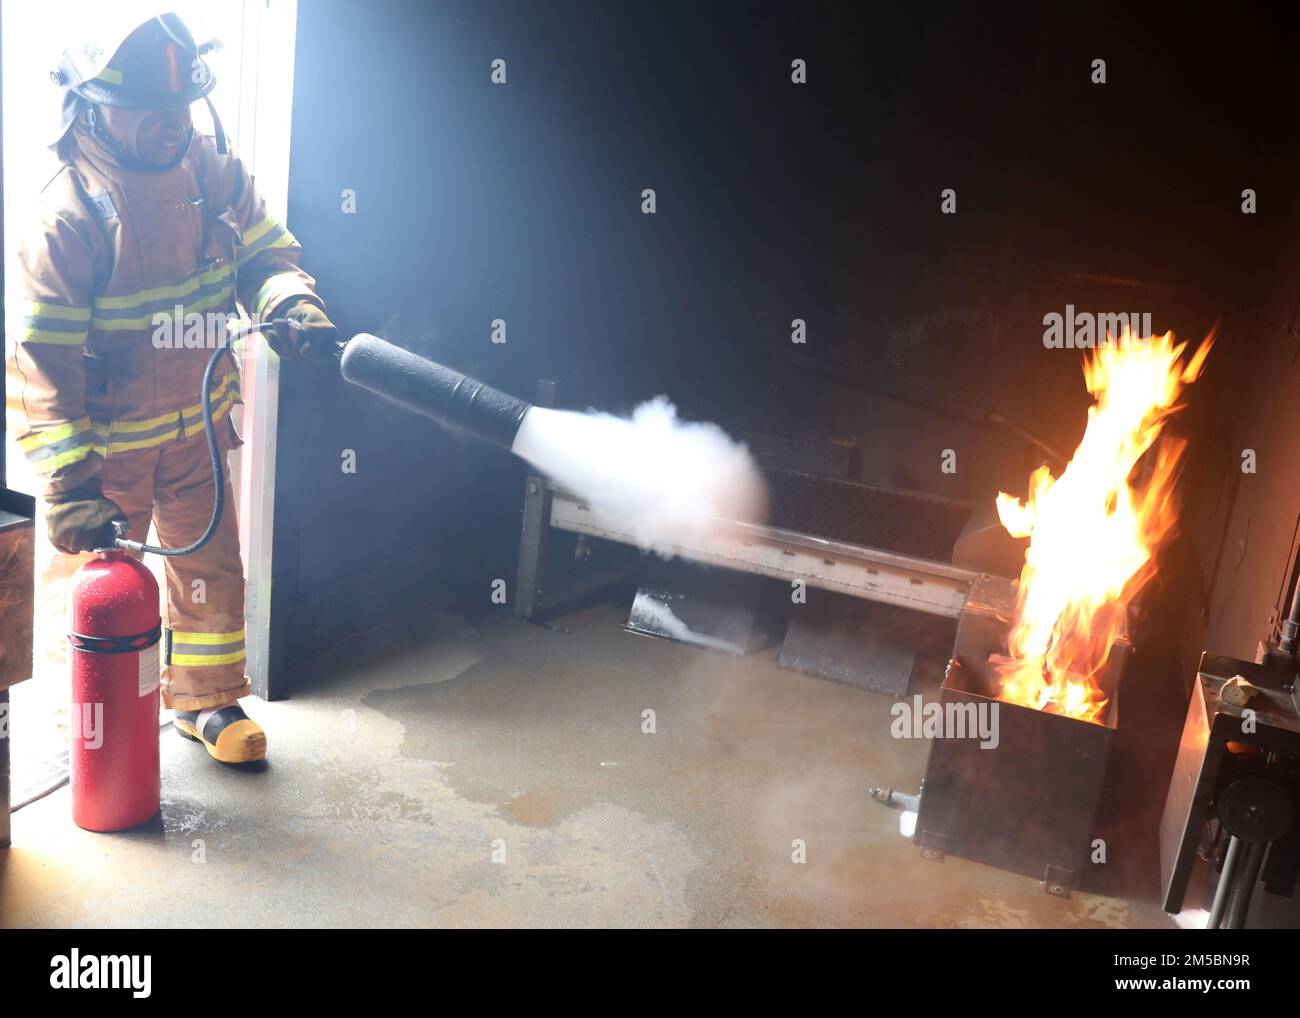 220223-N-OH262-0010--FORT EUSTIS, Va. (February 23, 2022)--A newly hired Civil Service Mariner (CIVMAR) uses a CO2 fire extinguisher to put out a simulated trash can fire at the Military Sealift Command Training Center East on Joint Base Langley-Fort Eustis, Virginia, Feb. 23. The training evolution was part of the MSC Basic Training Damage Control curriculum, which must be successfully completed prior to sailing in MSC's fleet of ships. Stock Photo